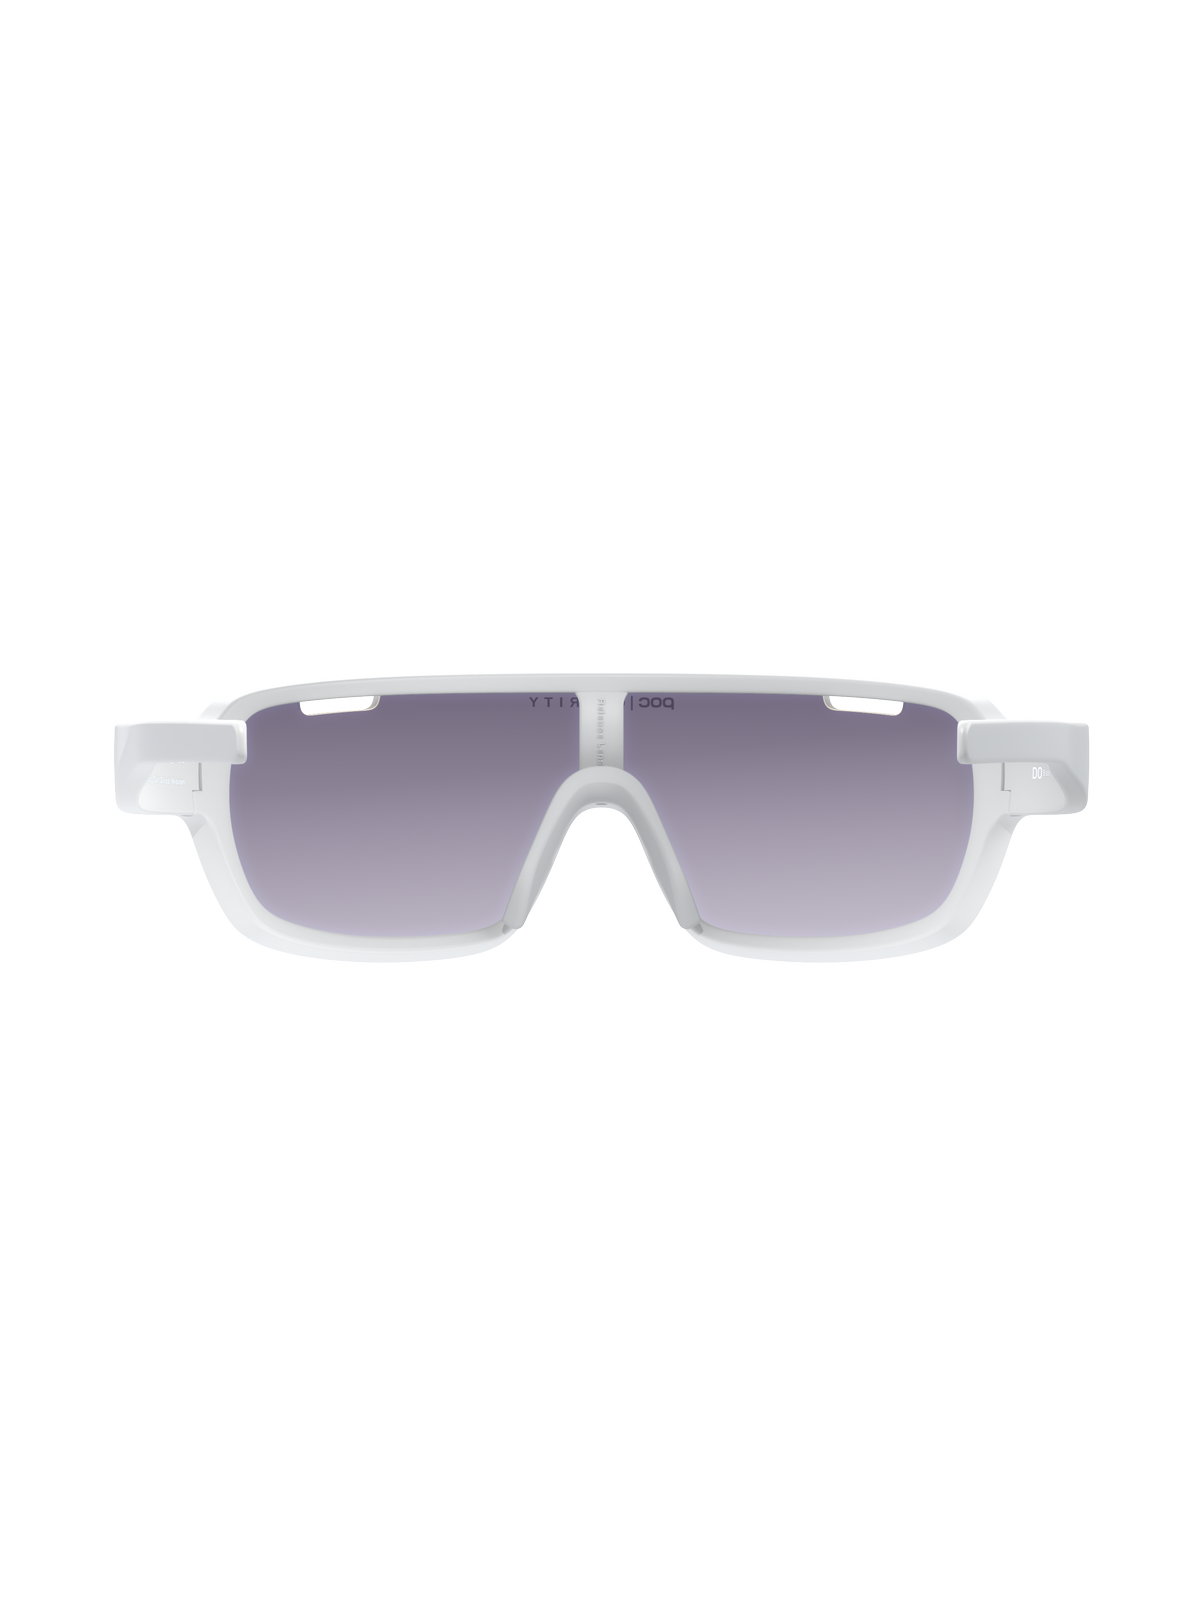 Okulary POC DO BLADE - Hydr. White - Clarity ROAD.Violet/Silver Mirror Cat 3